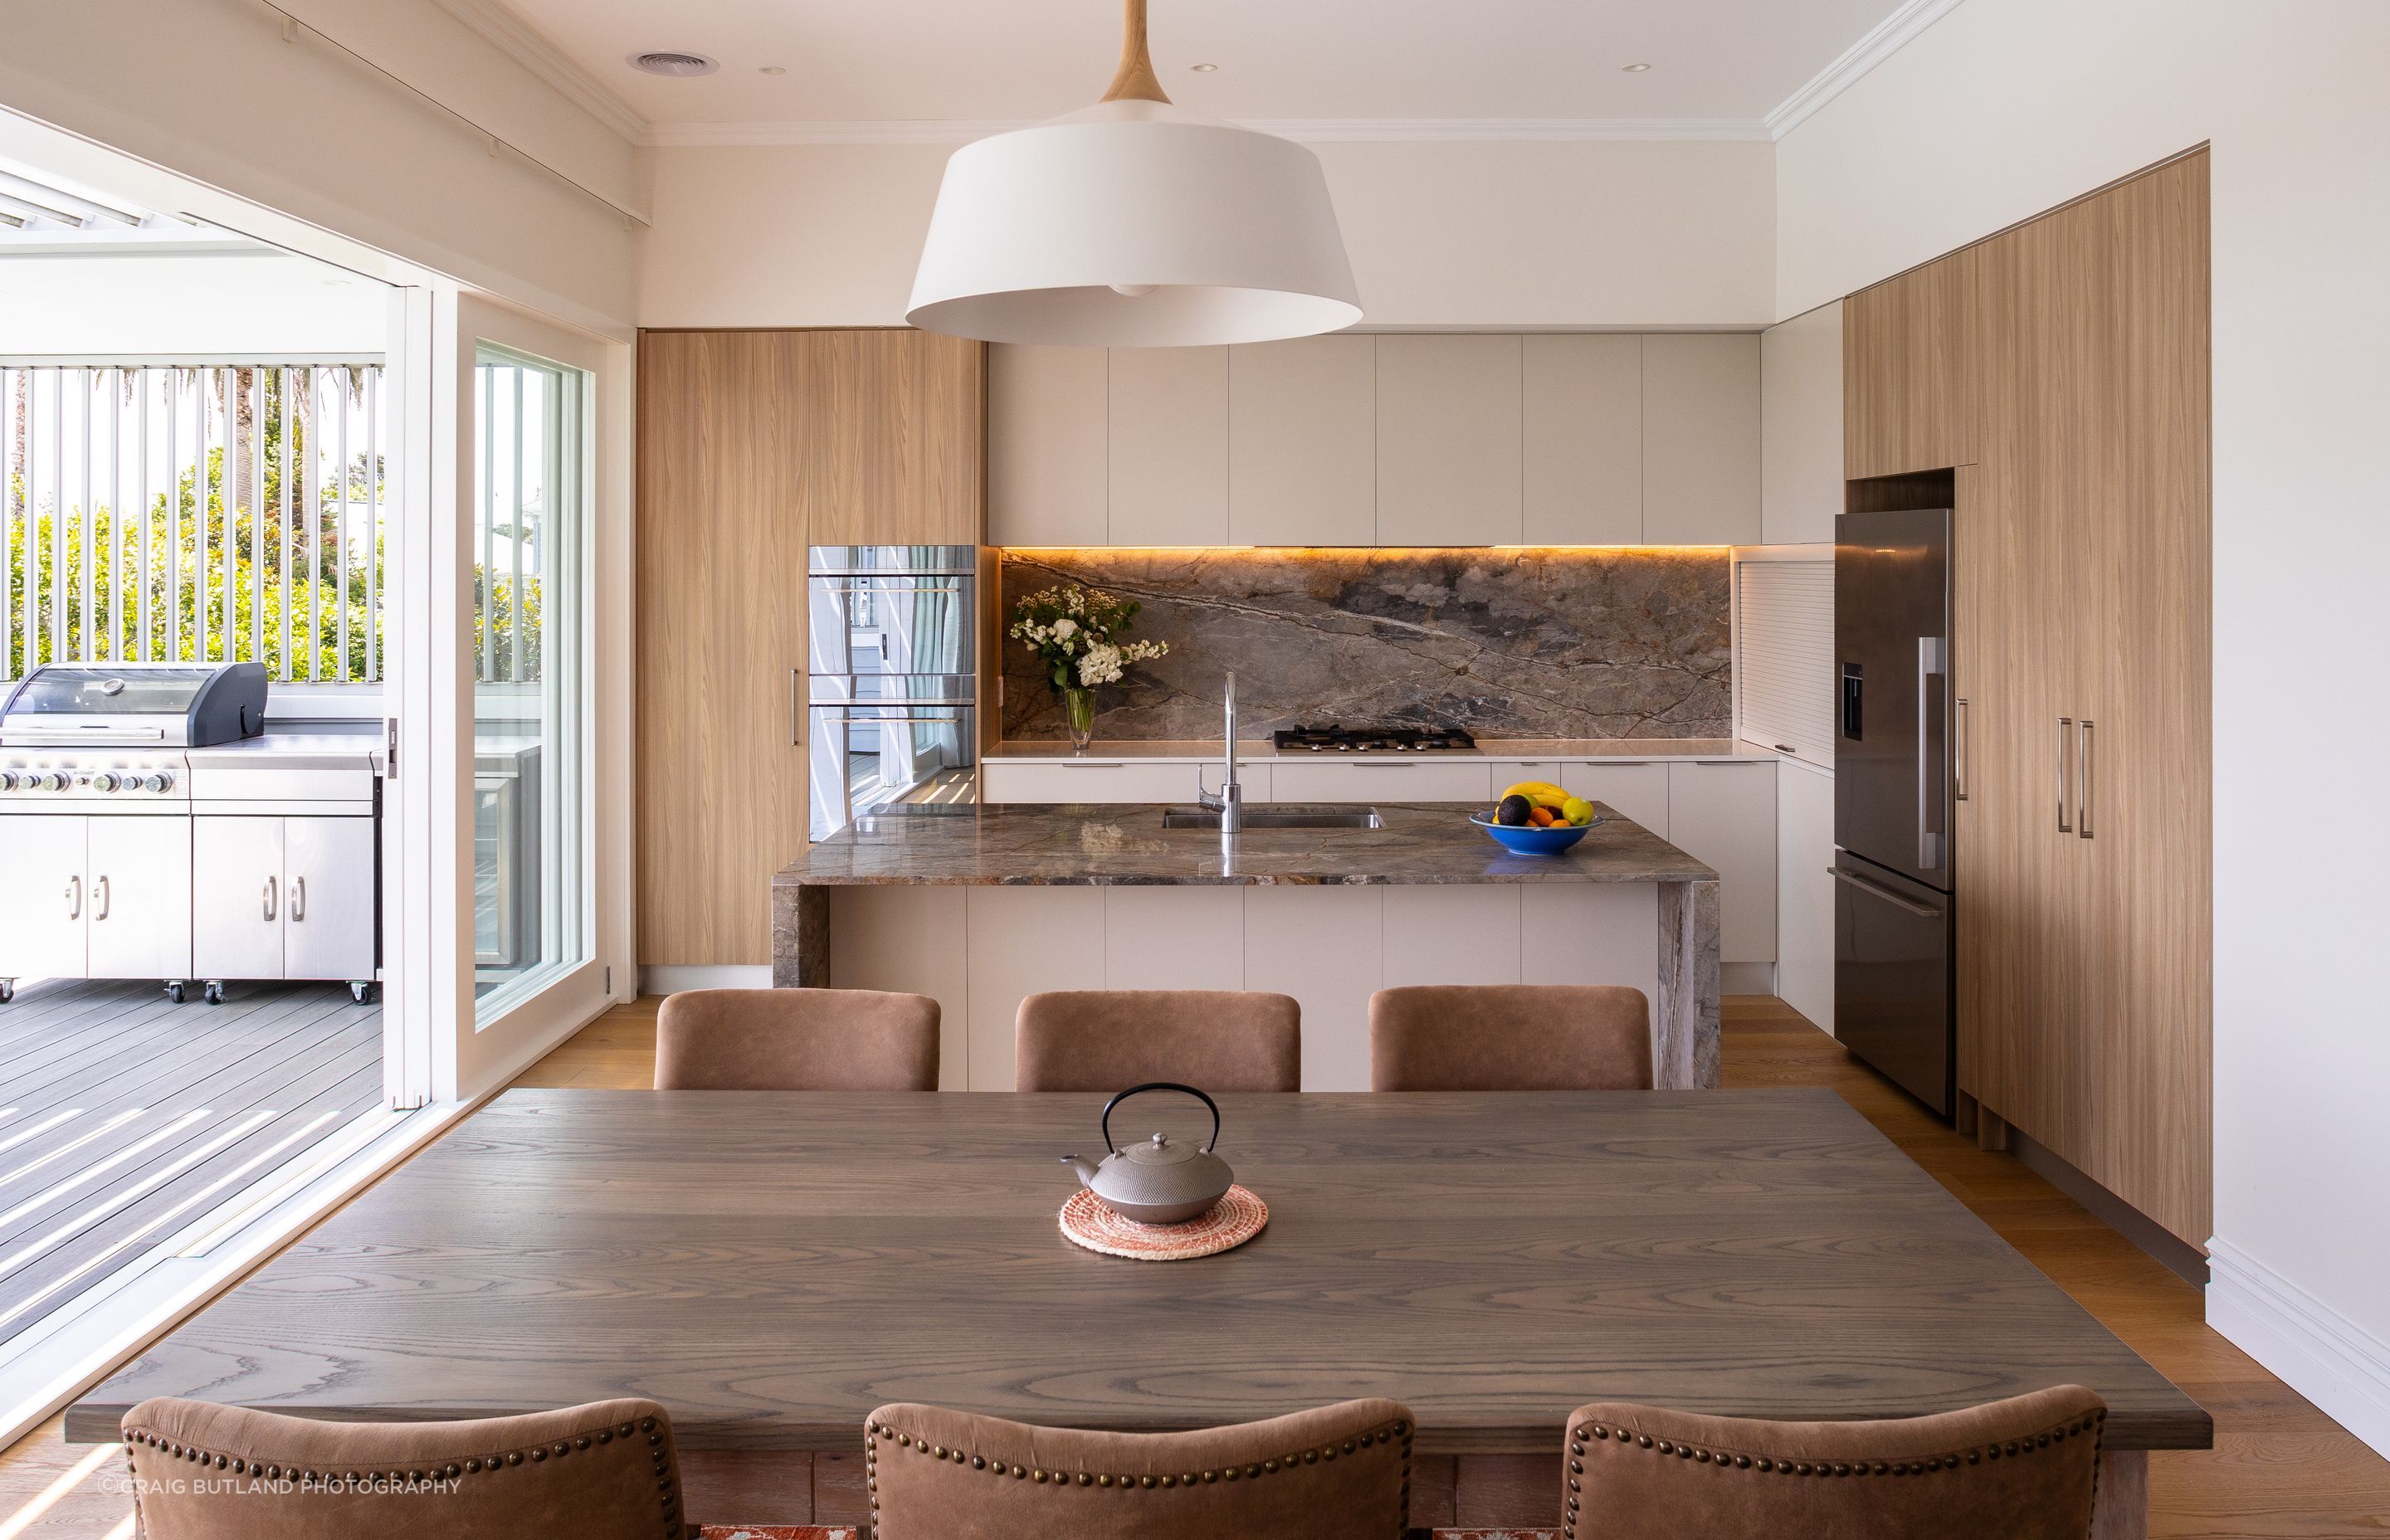 Warm tones are a feature of the new kitchen which provides easy access to the new covered deck and built in barbecue.